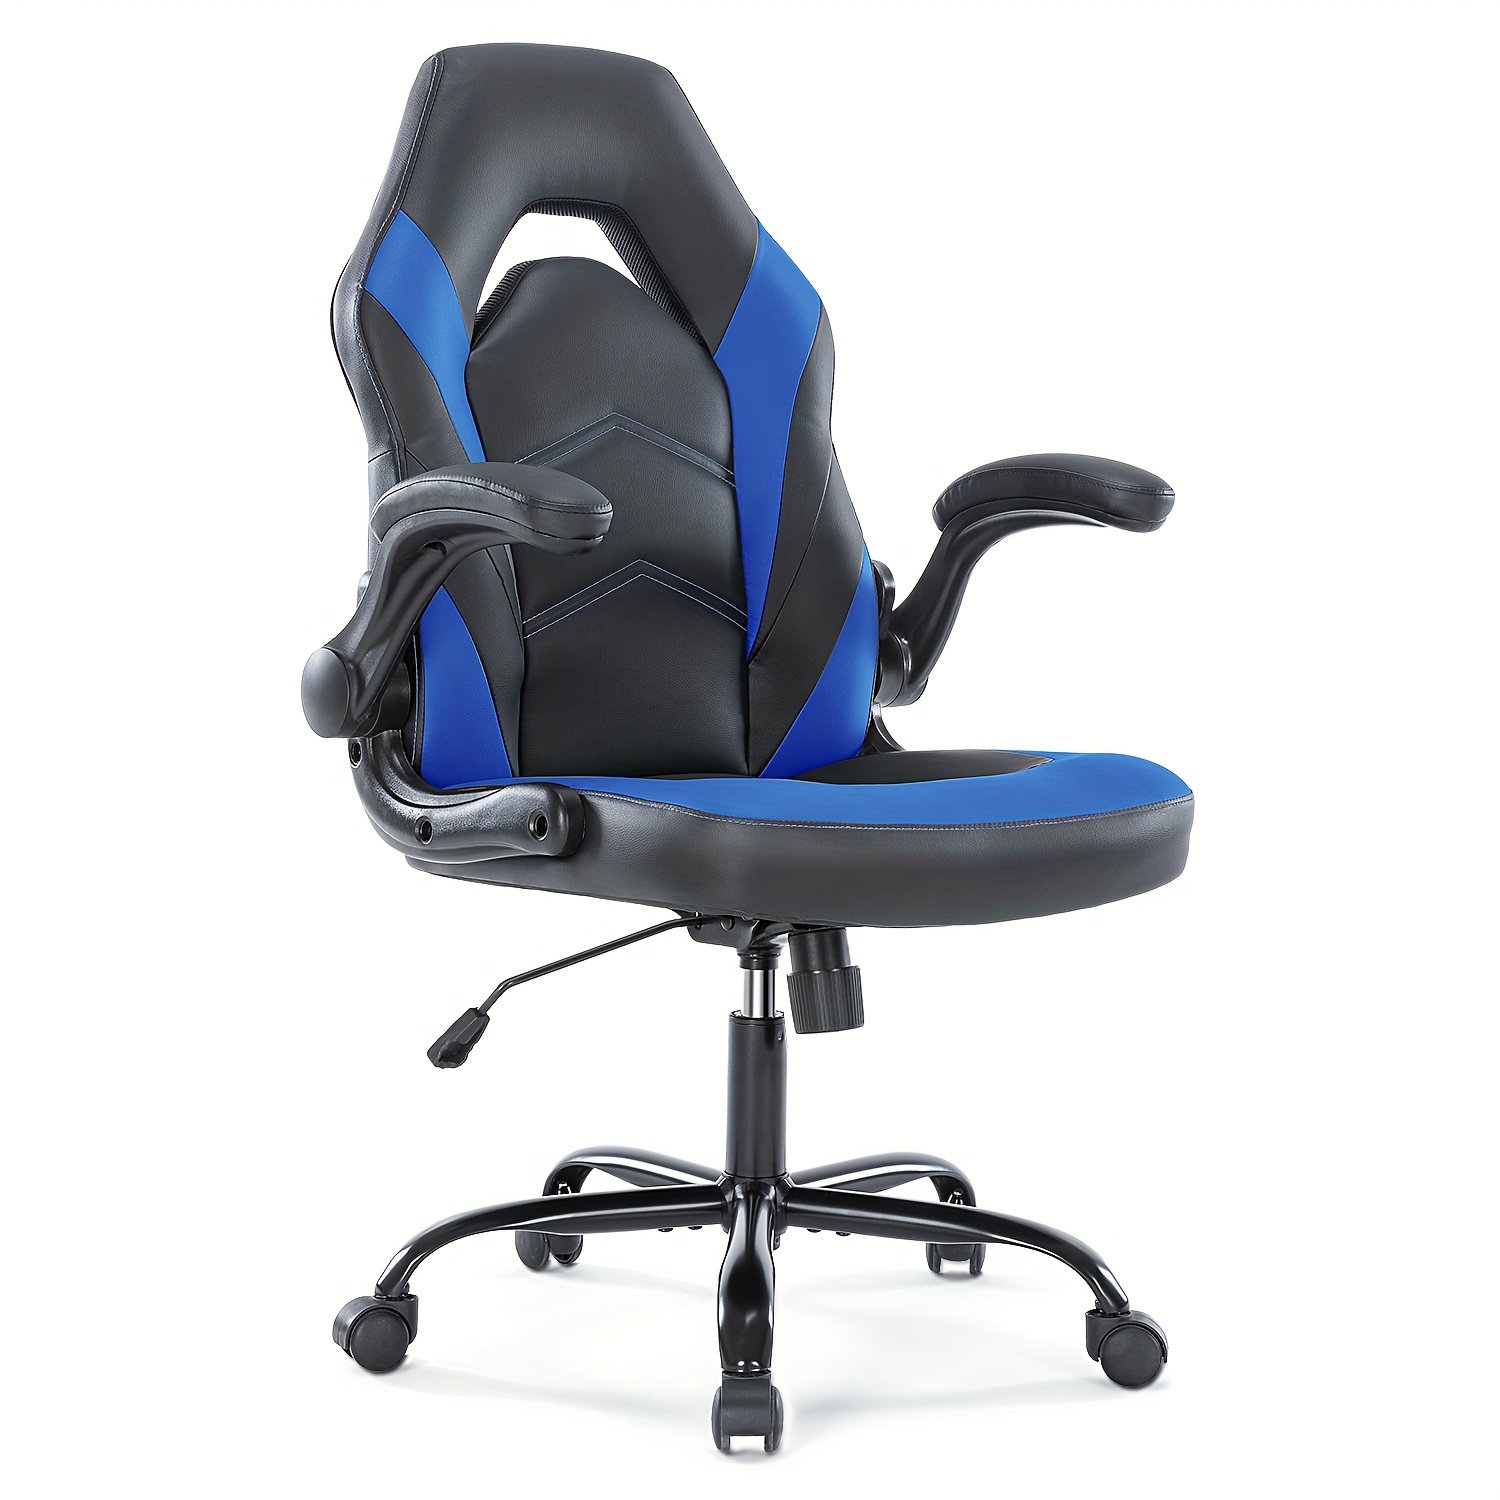 

Computer Gaming Desk Chair - Ergonomic Office Executive Adjustable Swivel Task Pu Leather Racing Chair With Flip-up Armrest For Adults, Men, Gamer